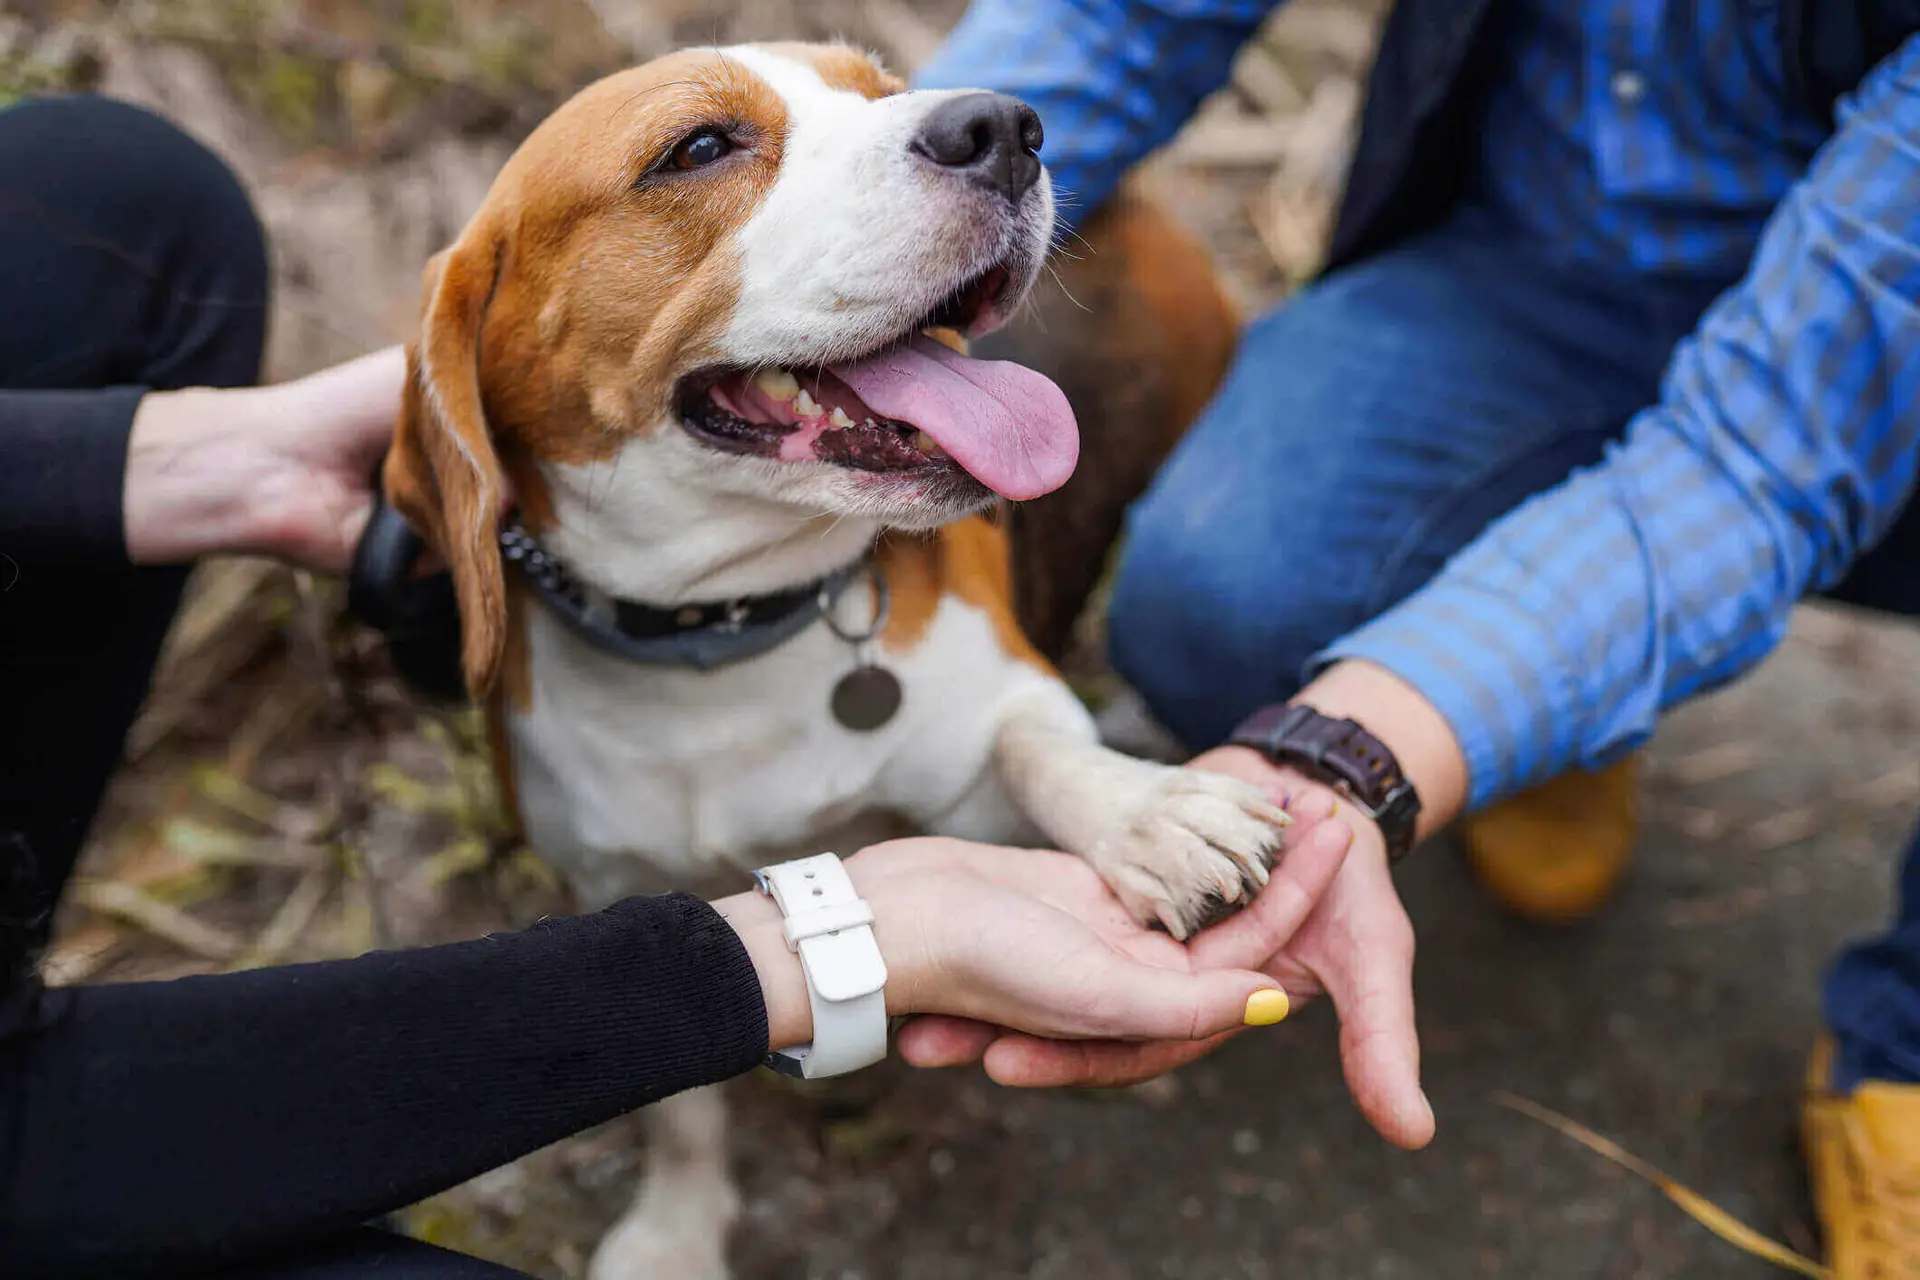 Happy beagle dog has his paw in his owner's hands. The owners are petting the happy beagle dog on his back with their other hands layered with the man's hand on the bottom, woman's hand in the middle, with the beagle's paw on top.